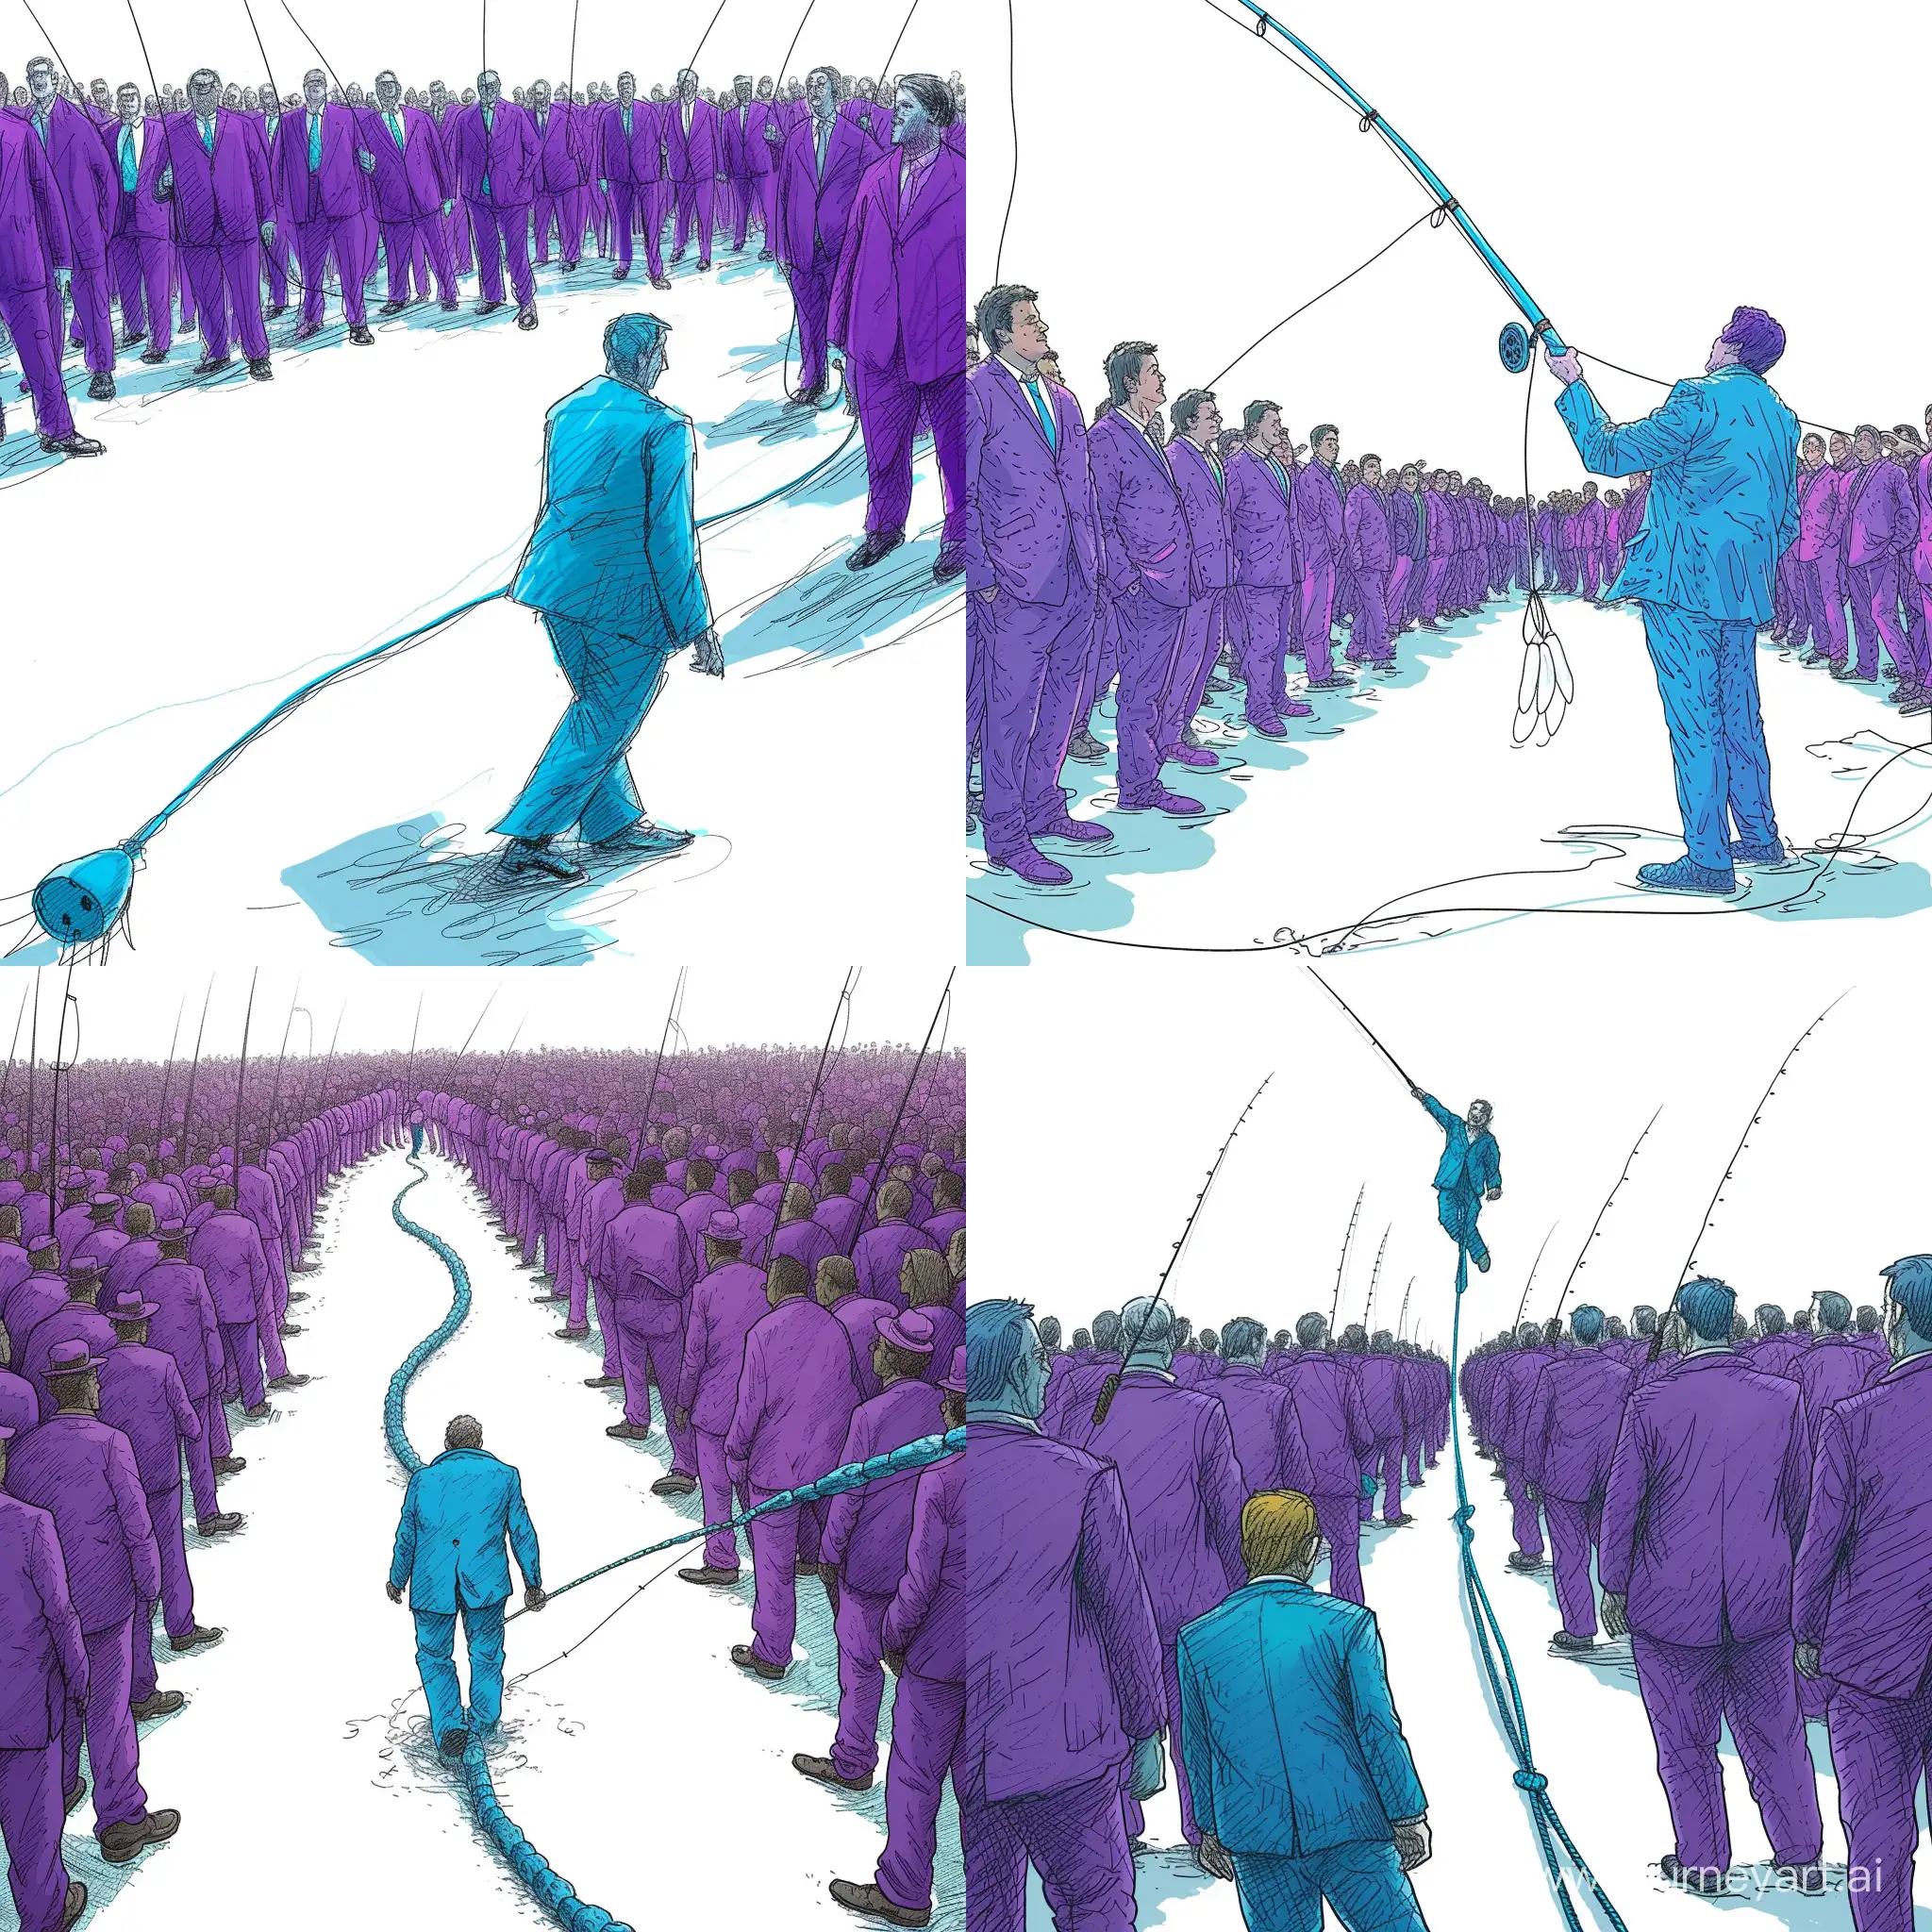 Joyful-Victor-in-Purple-Suits-on-a-Fishing-Road-Sketch-Drawing-with-Detailed-Illustrator-Style